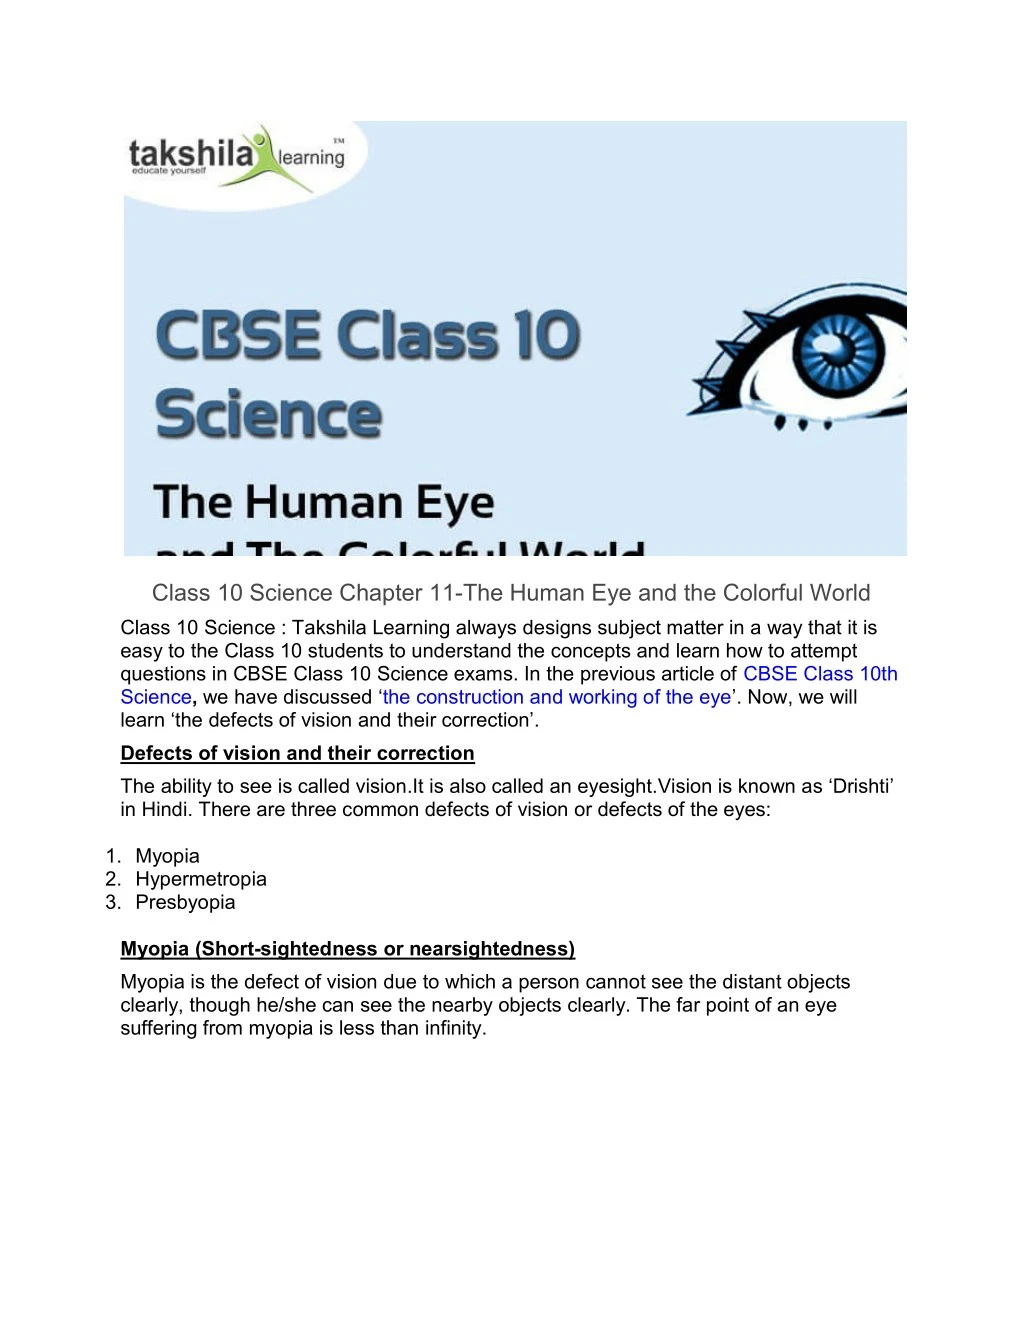 class 10 science chapter 11 the human